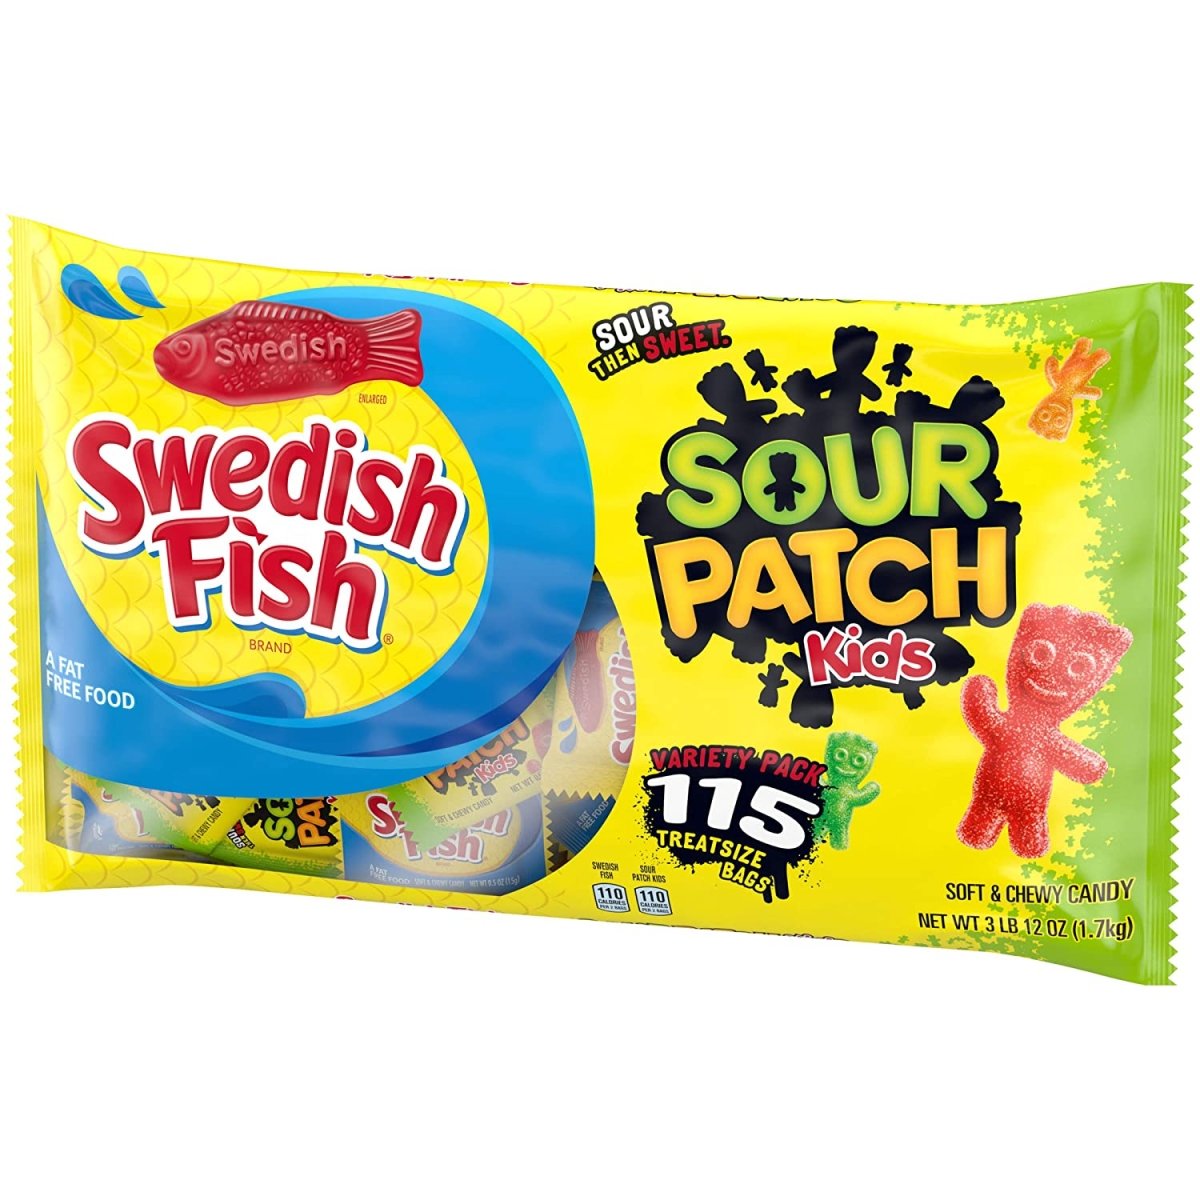 Halloween Sour Patch and Swedish Fish Variety Pack 115 Pieces 1.7kg - Candy Mail UK